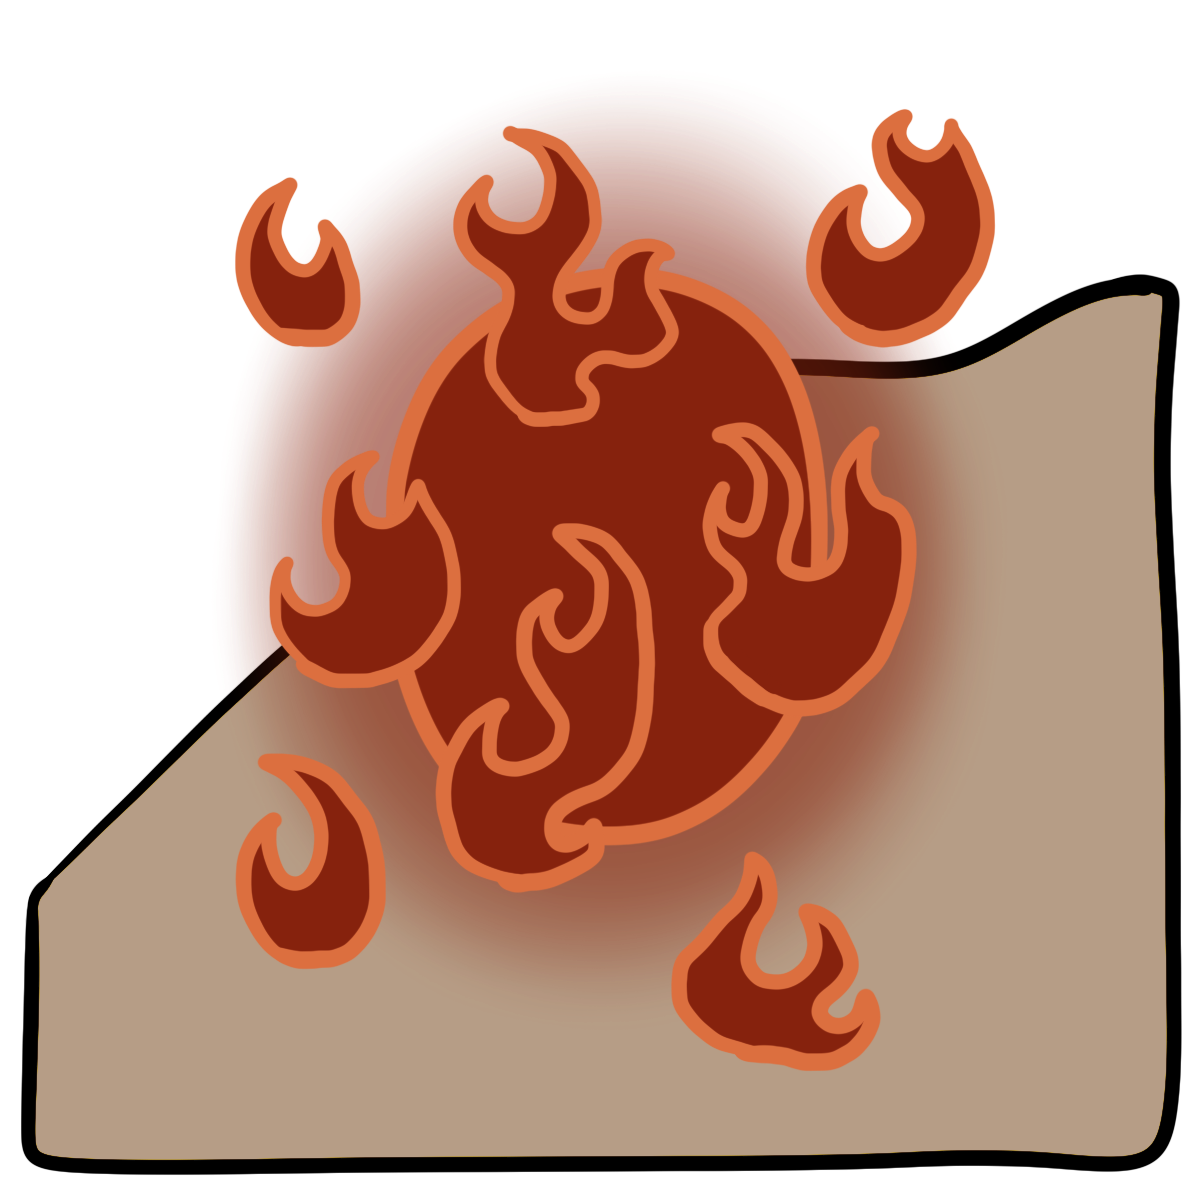 Orange-red oval with flames around it. Curved beige skin fills the bottom half of the background.